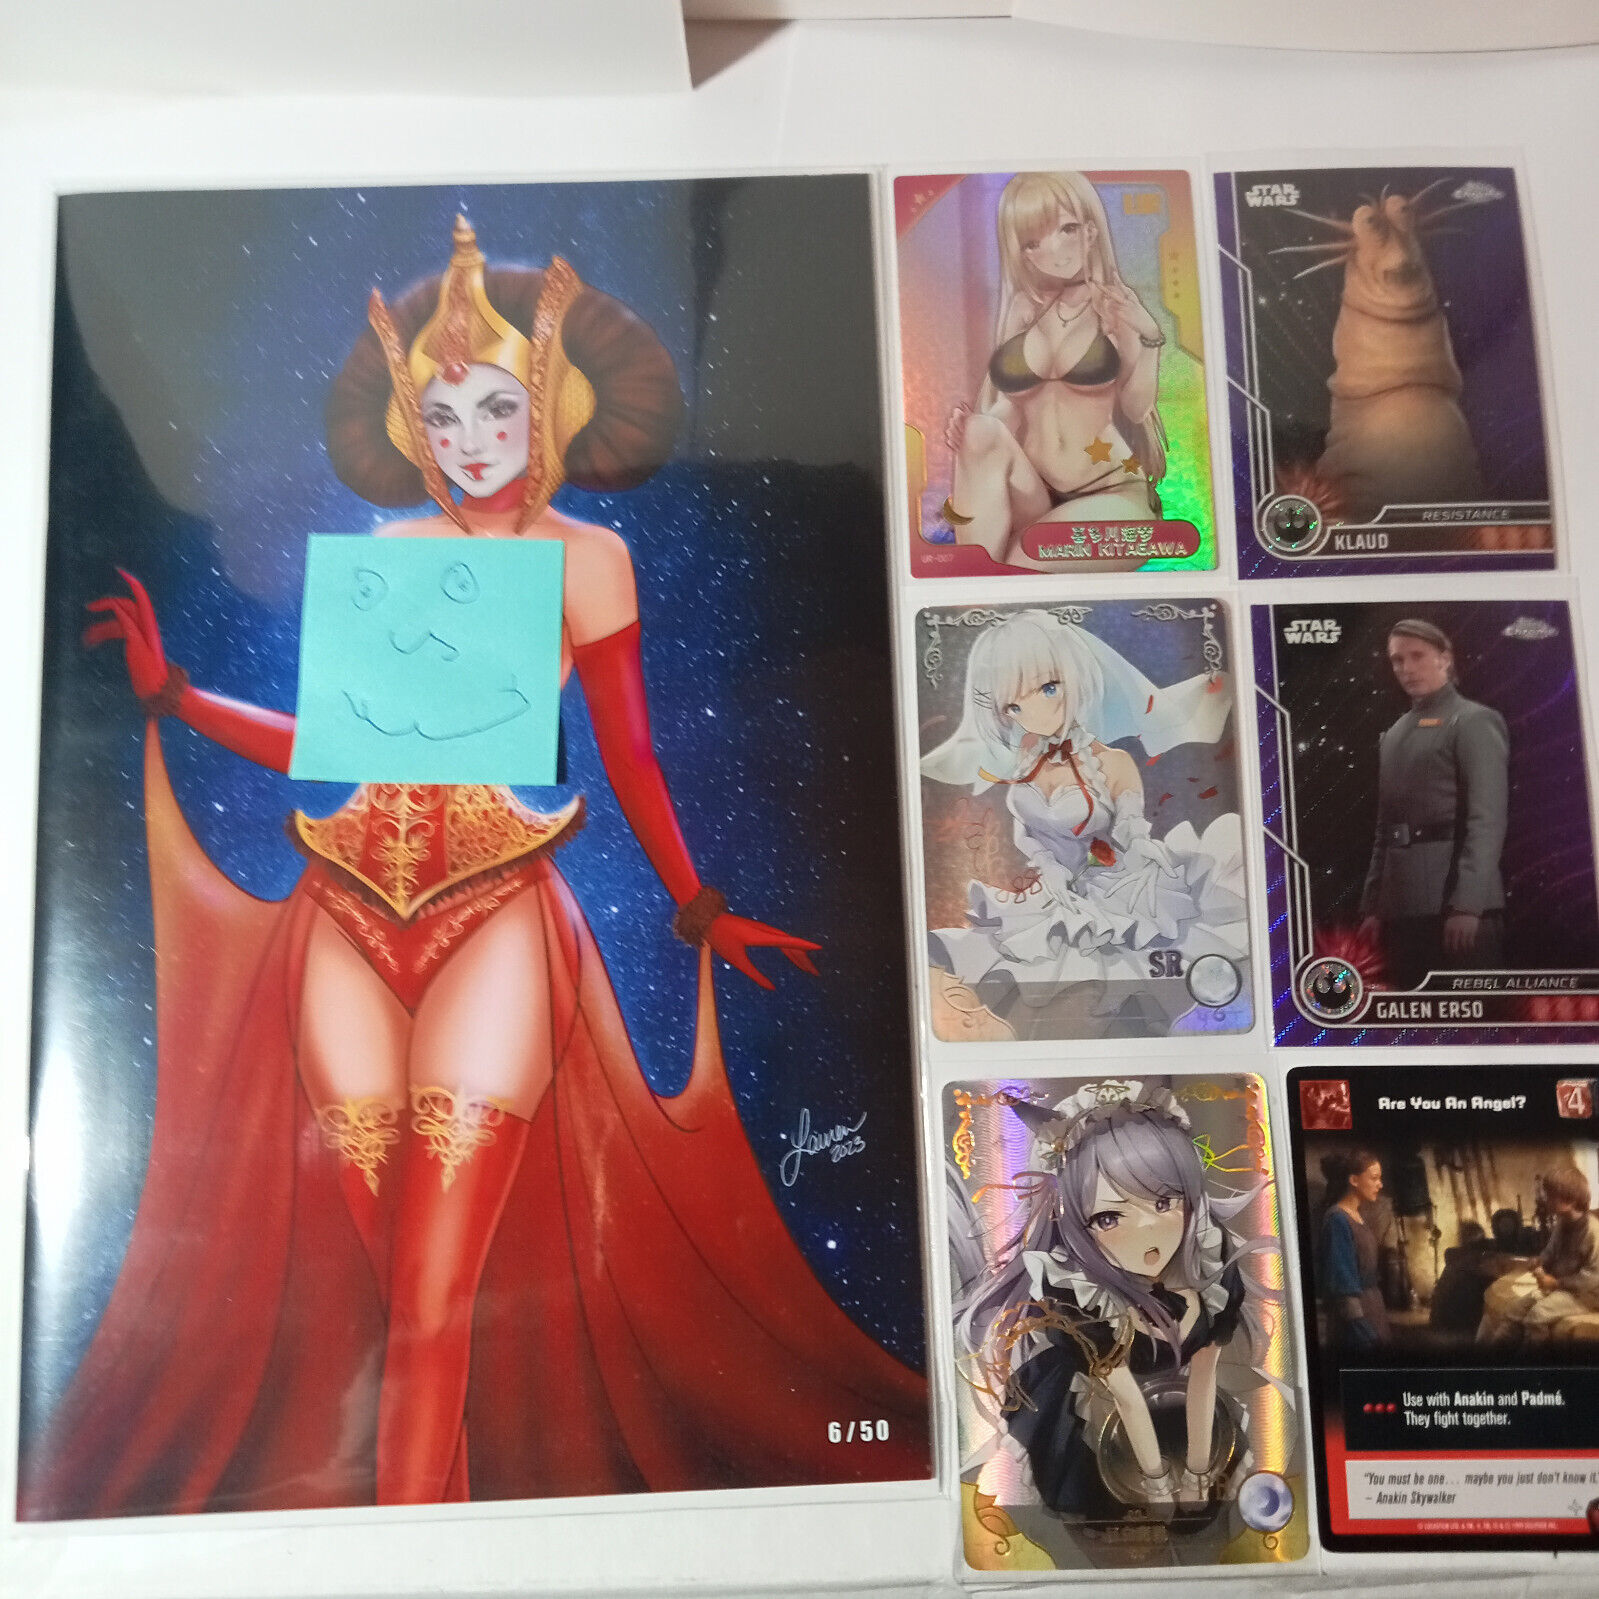 🔥🔥🥵MAD LOVE - LAUREN WRIGHT - QUEEN AMIDALA - COSPLAY COMIC /50 + HOLO CARDS